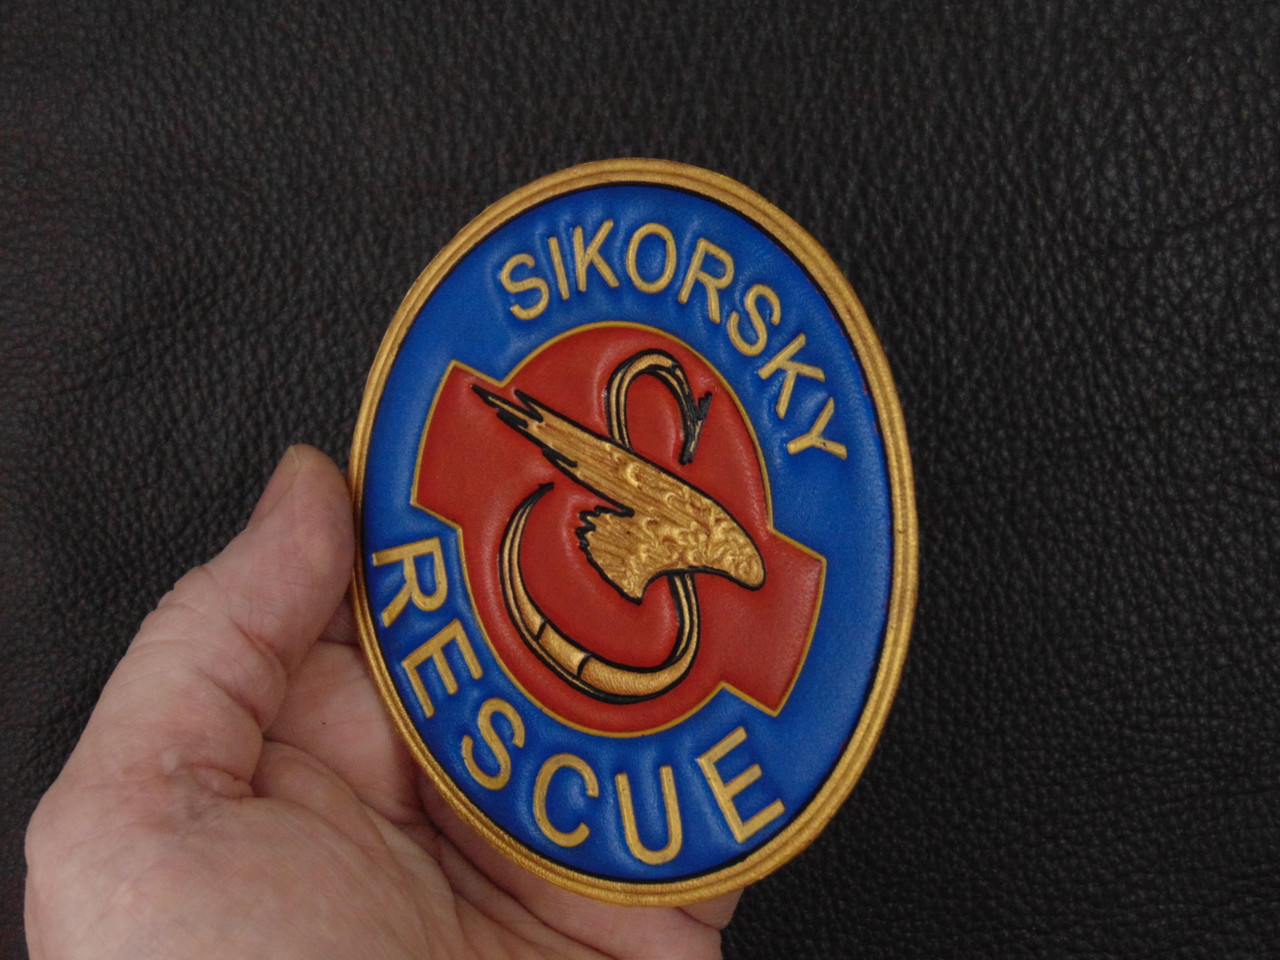 Sikorsky Rescue